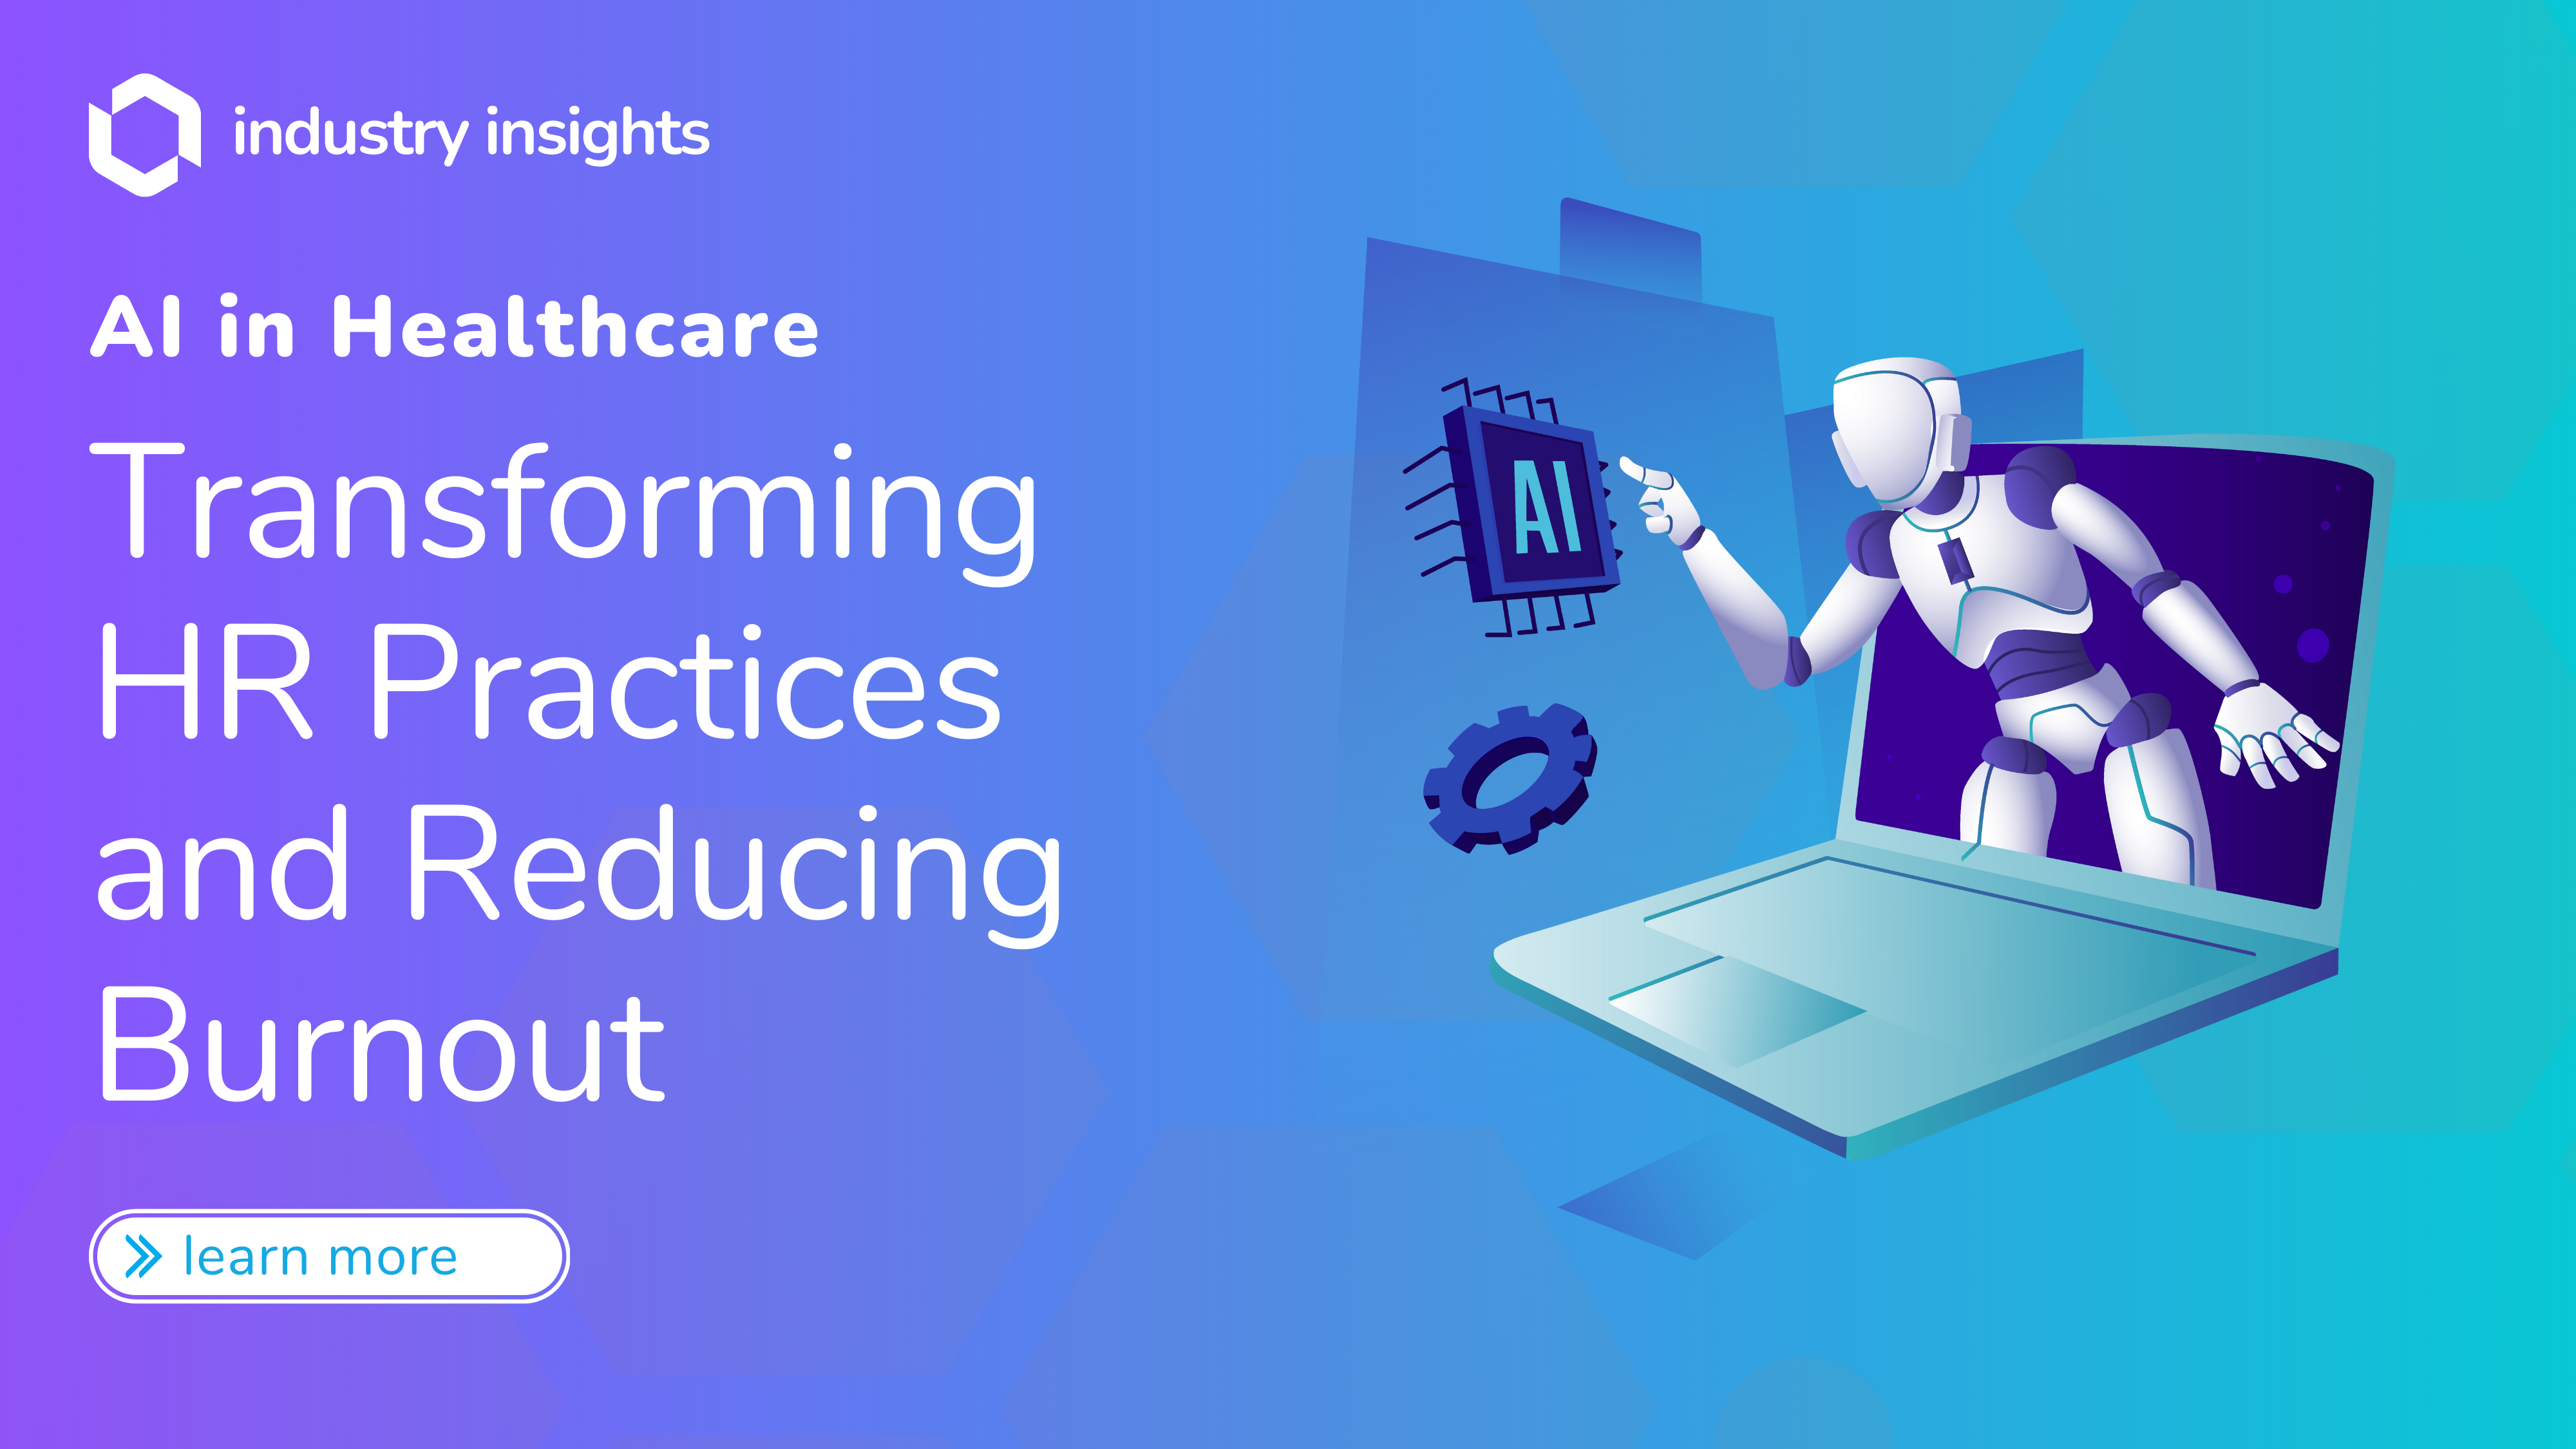 AI in Healthcare: Transforming HR Practices and Reducing Burnout